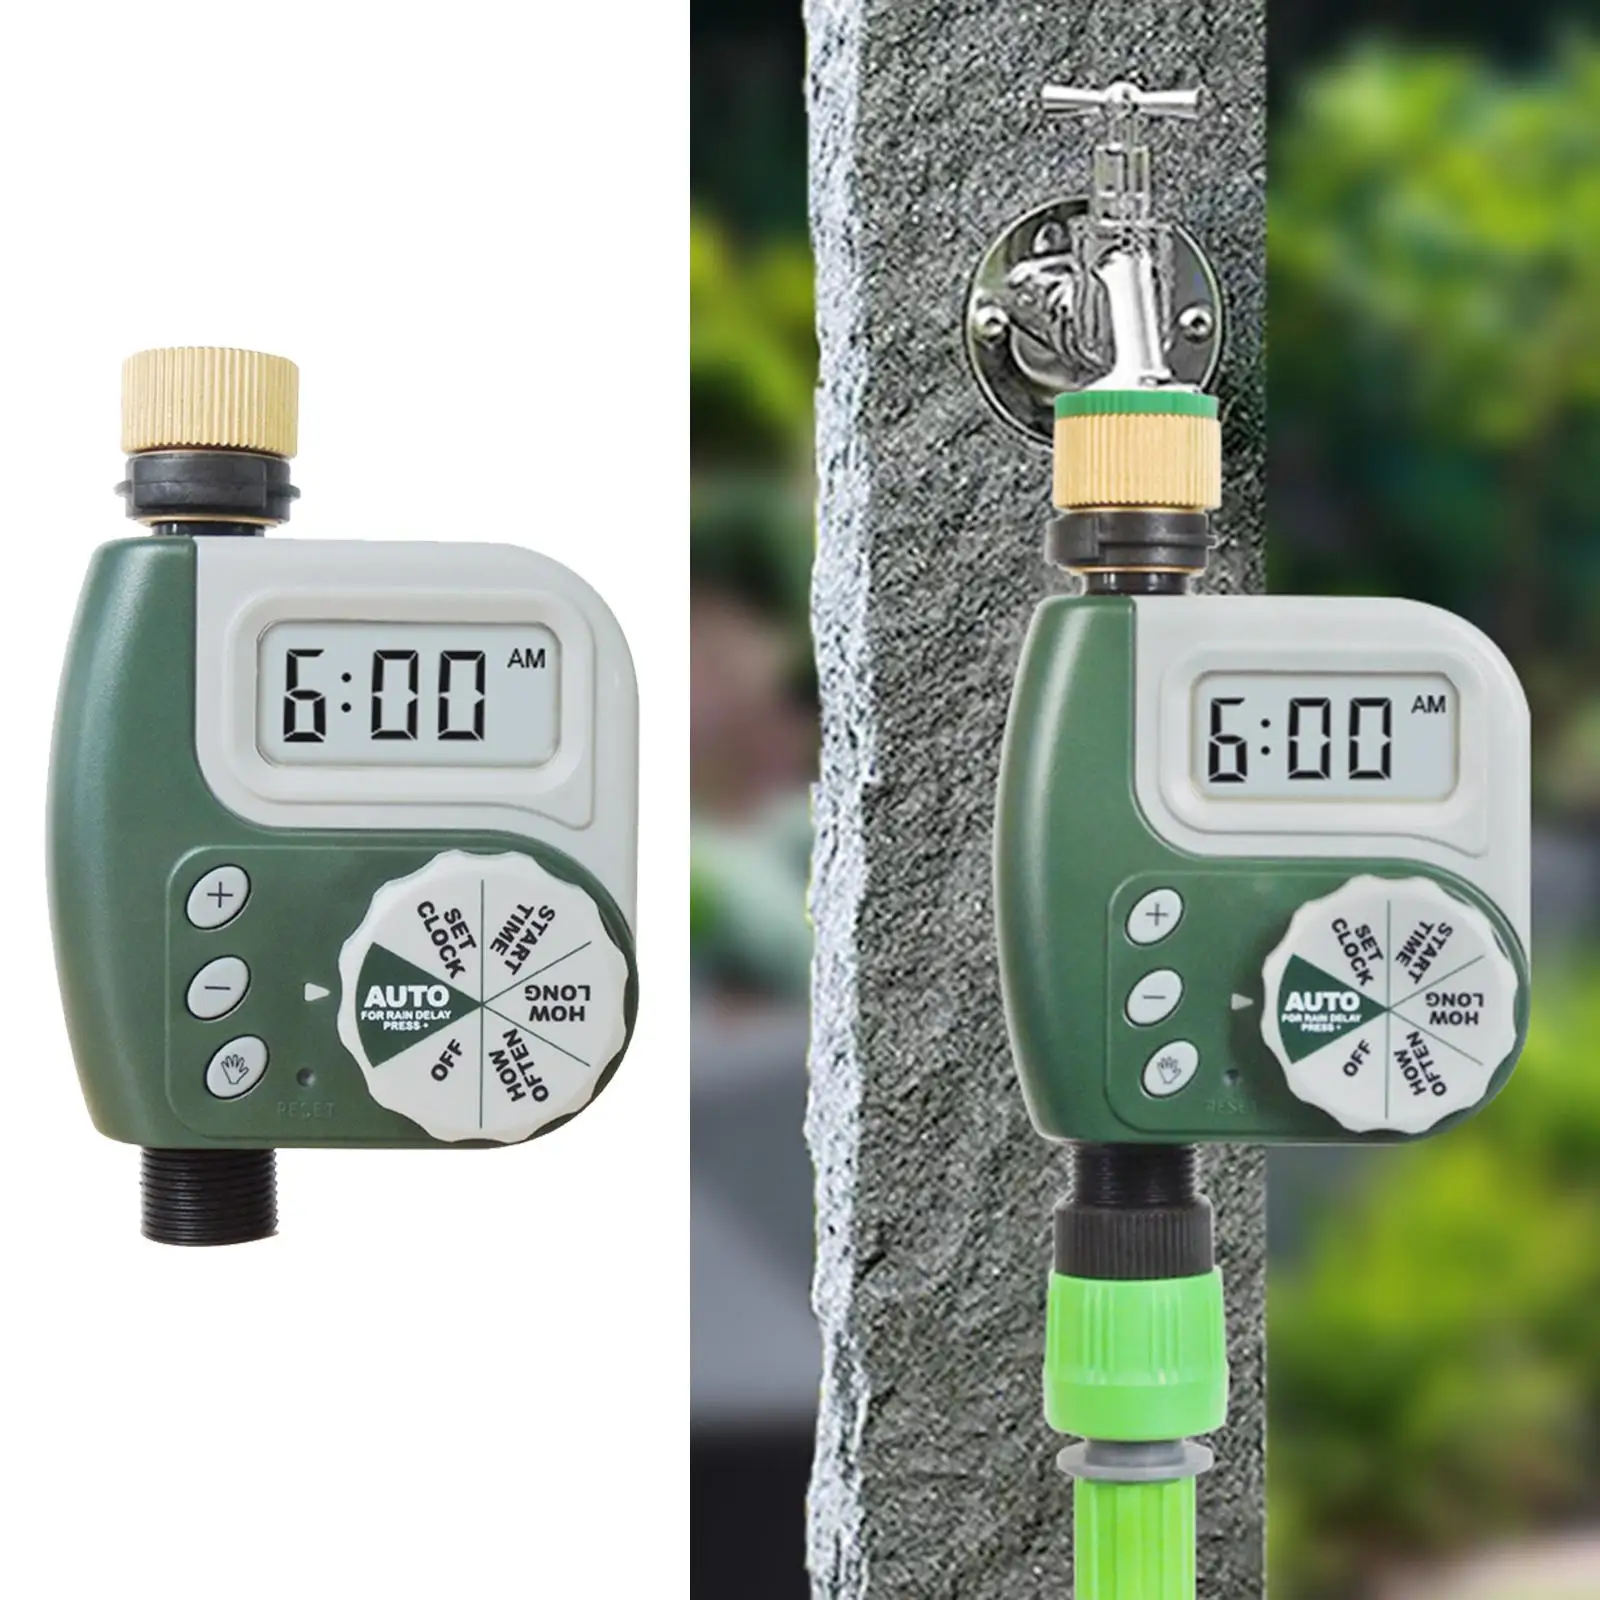 Garden Automatic Watering Timer Electronic Irrigation Controllers Garden Watering Control System for Lawn Sprinkler Watering